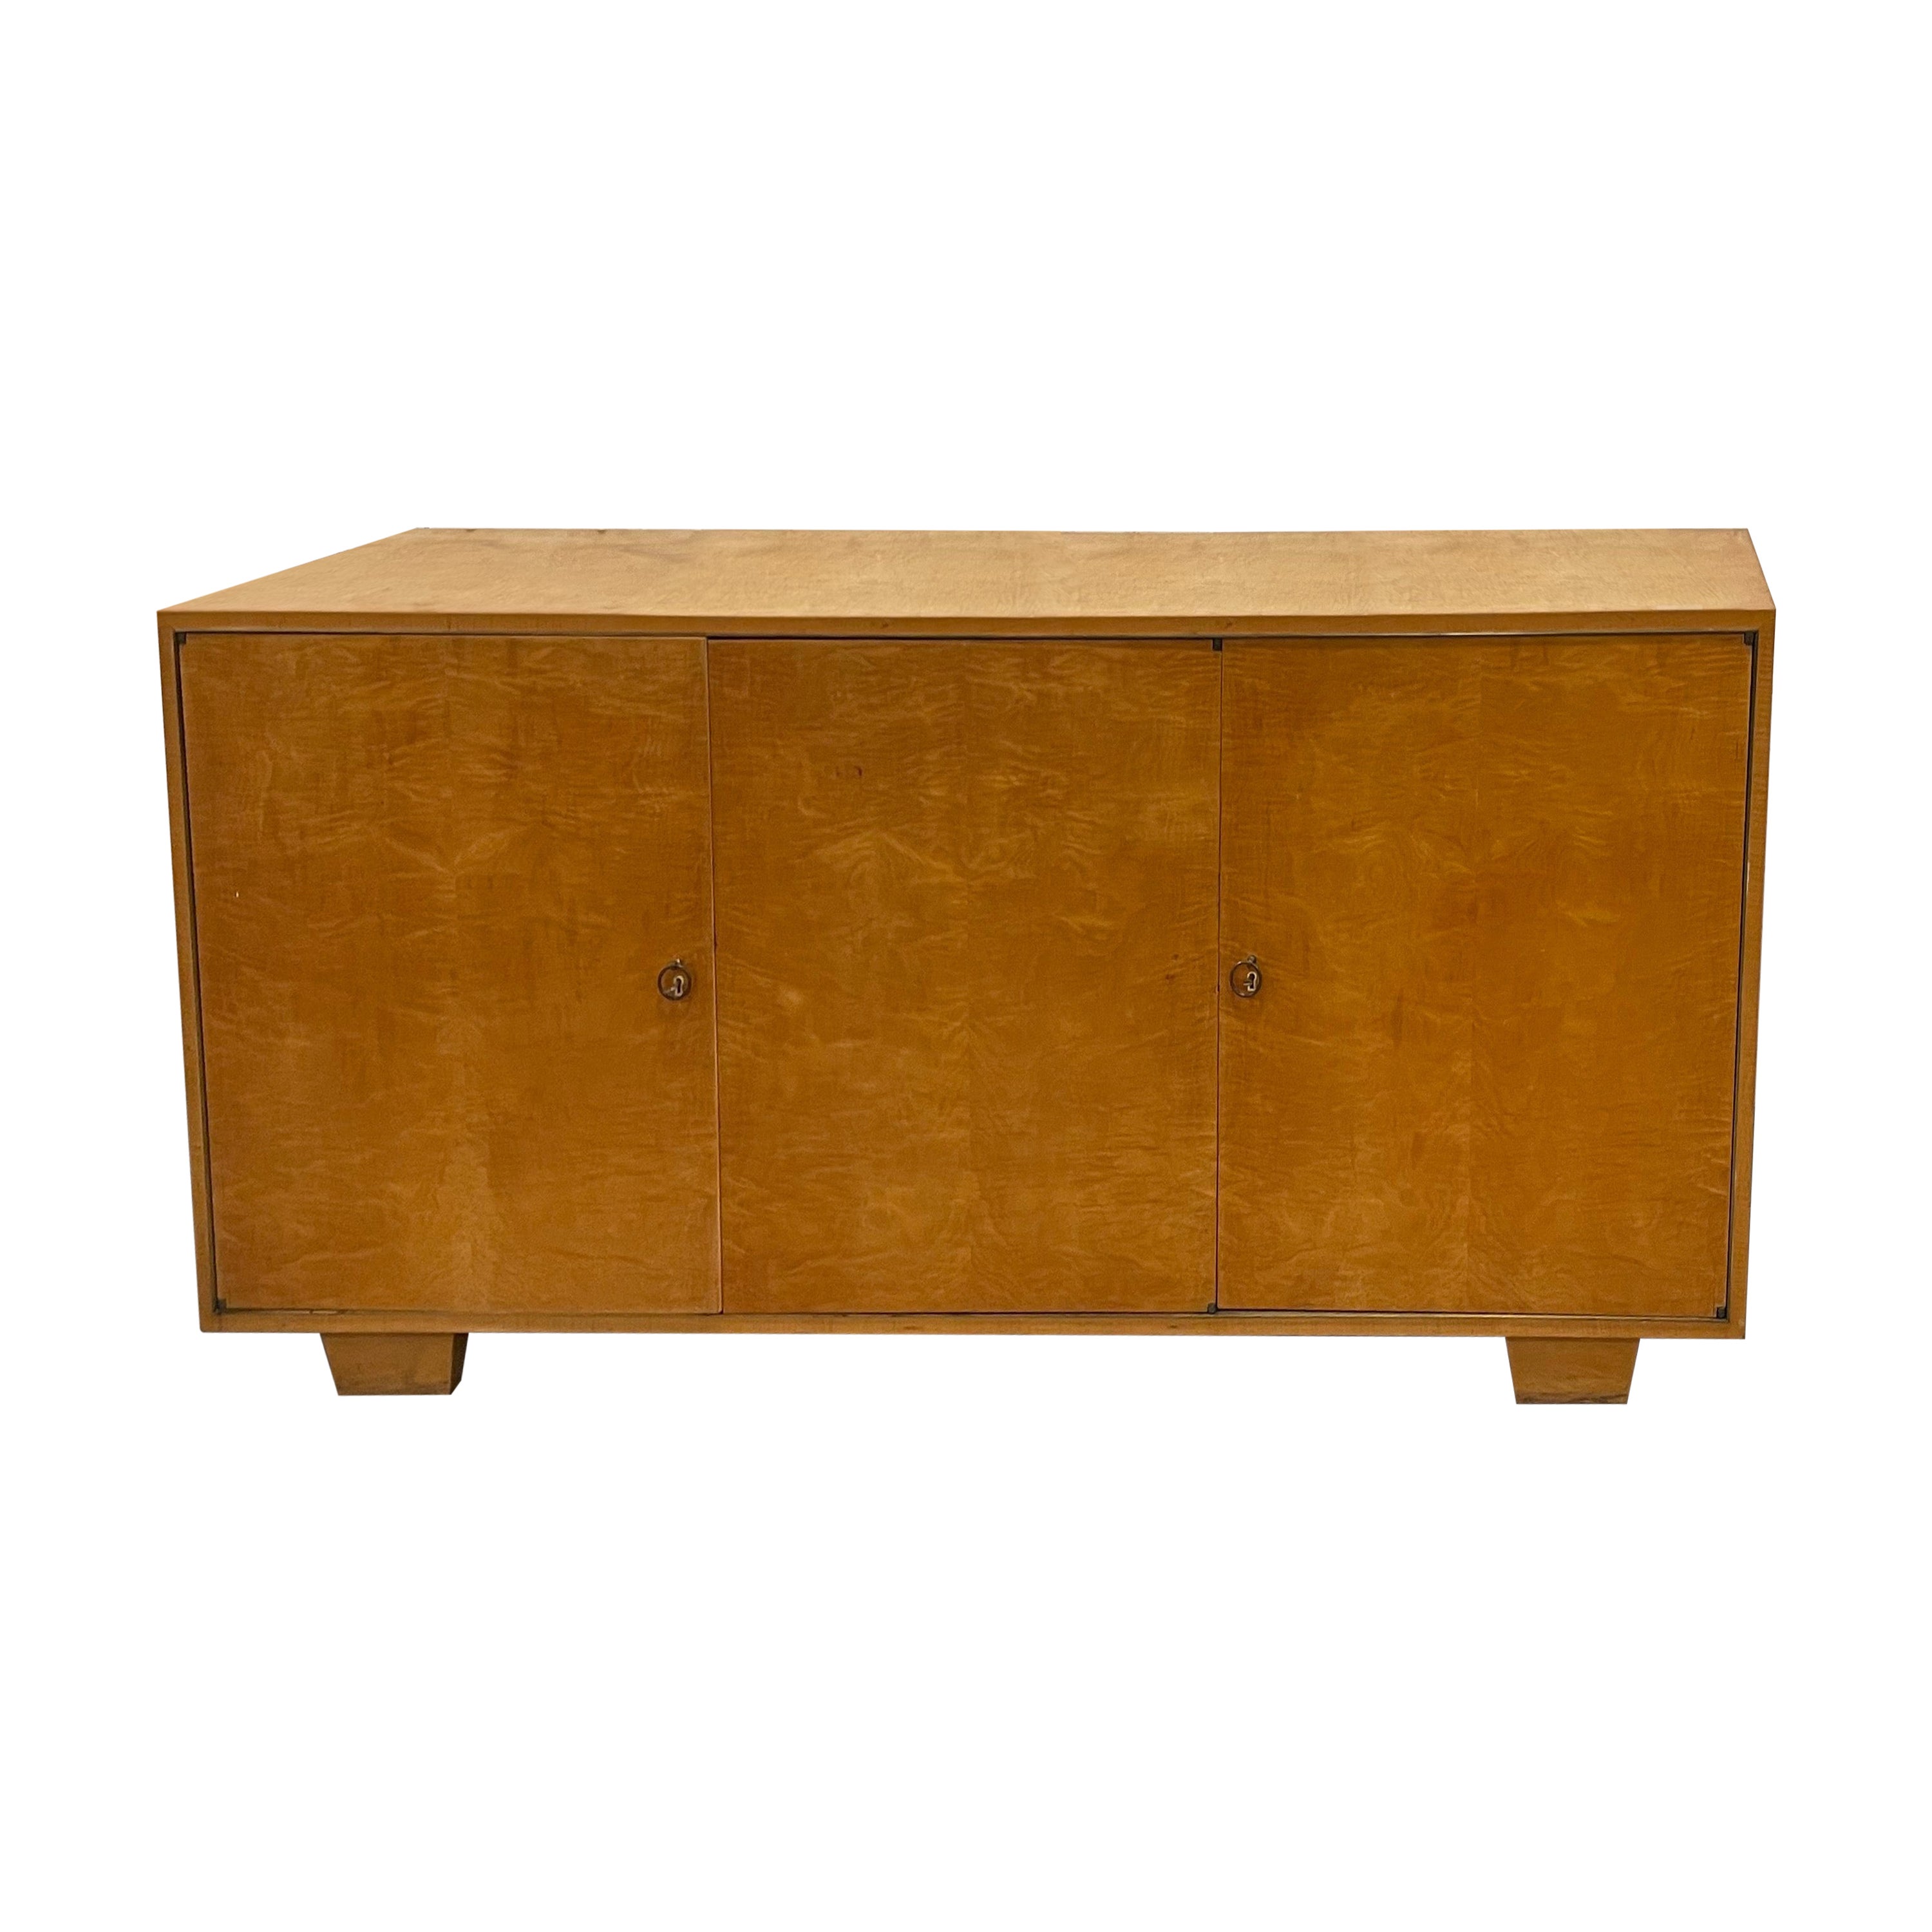 Art Deco Sycomore Sideboard With Multiple Drawers Attributed to De Coene-Belgium